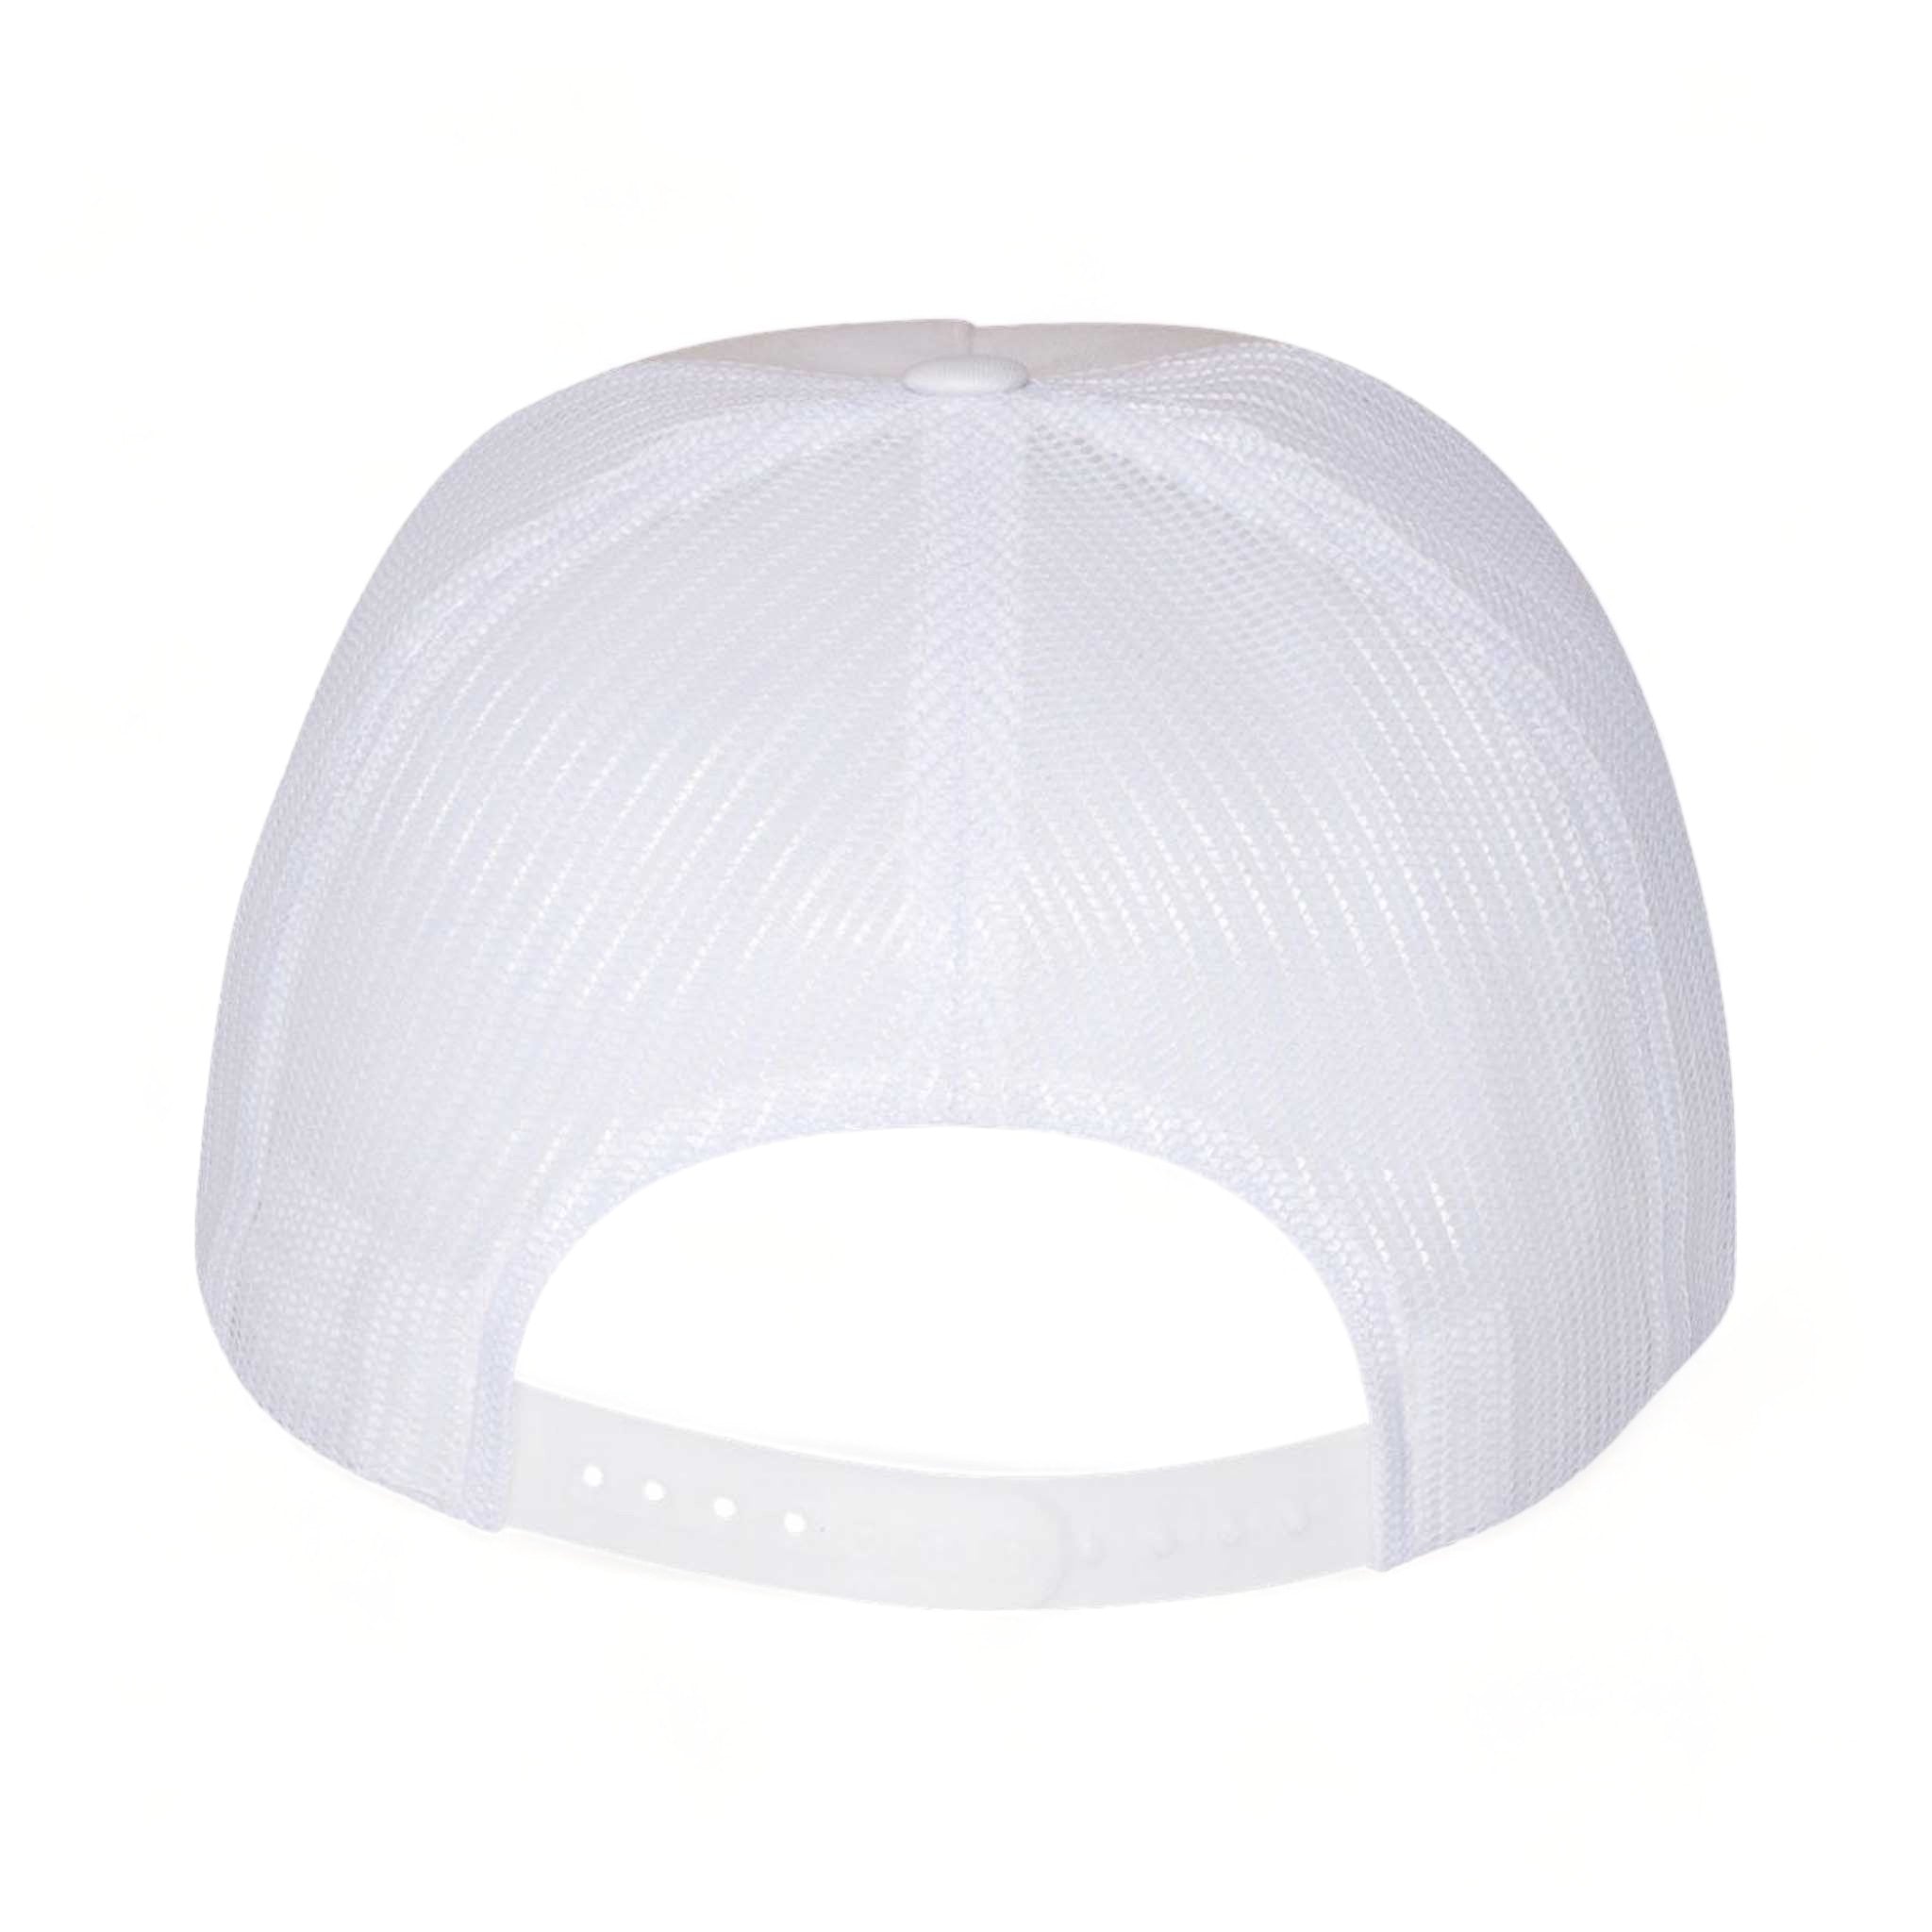 Back view of YP Classics 6006 custom hat in white